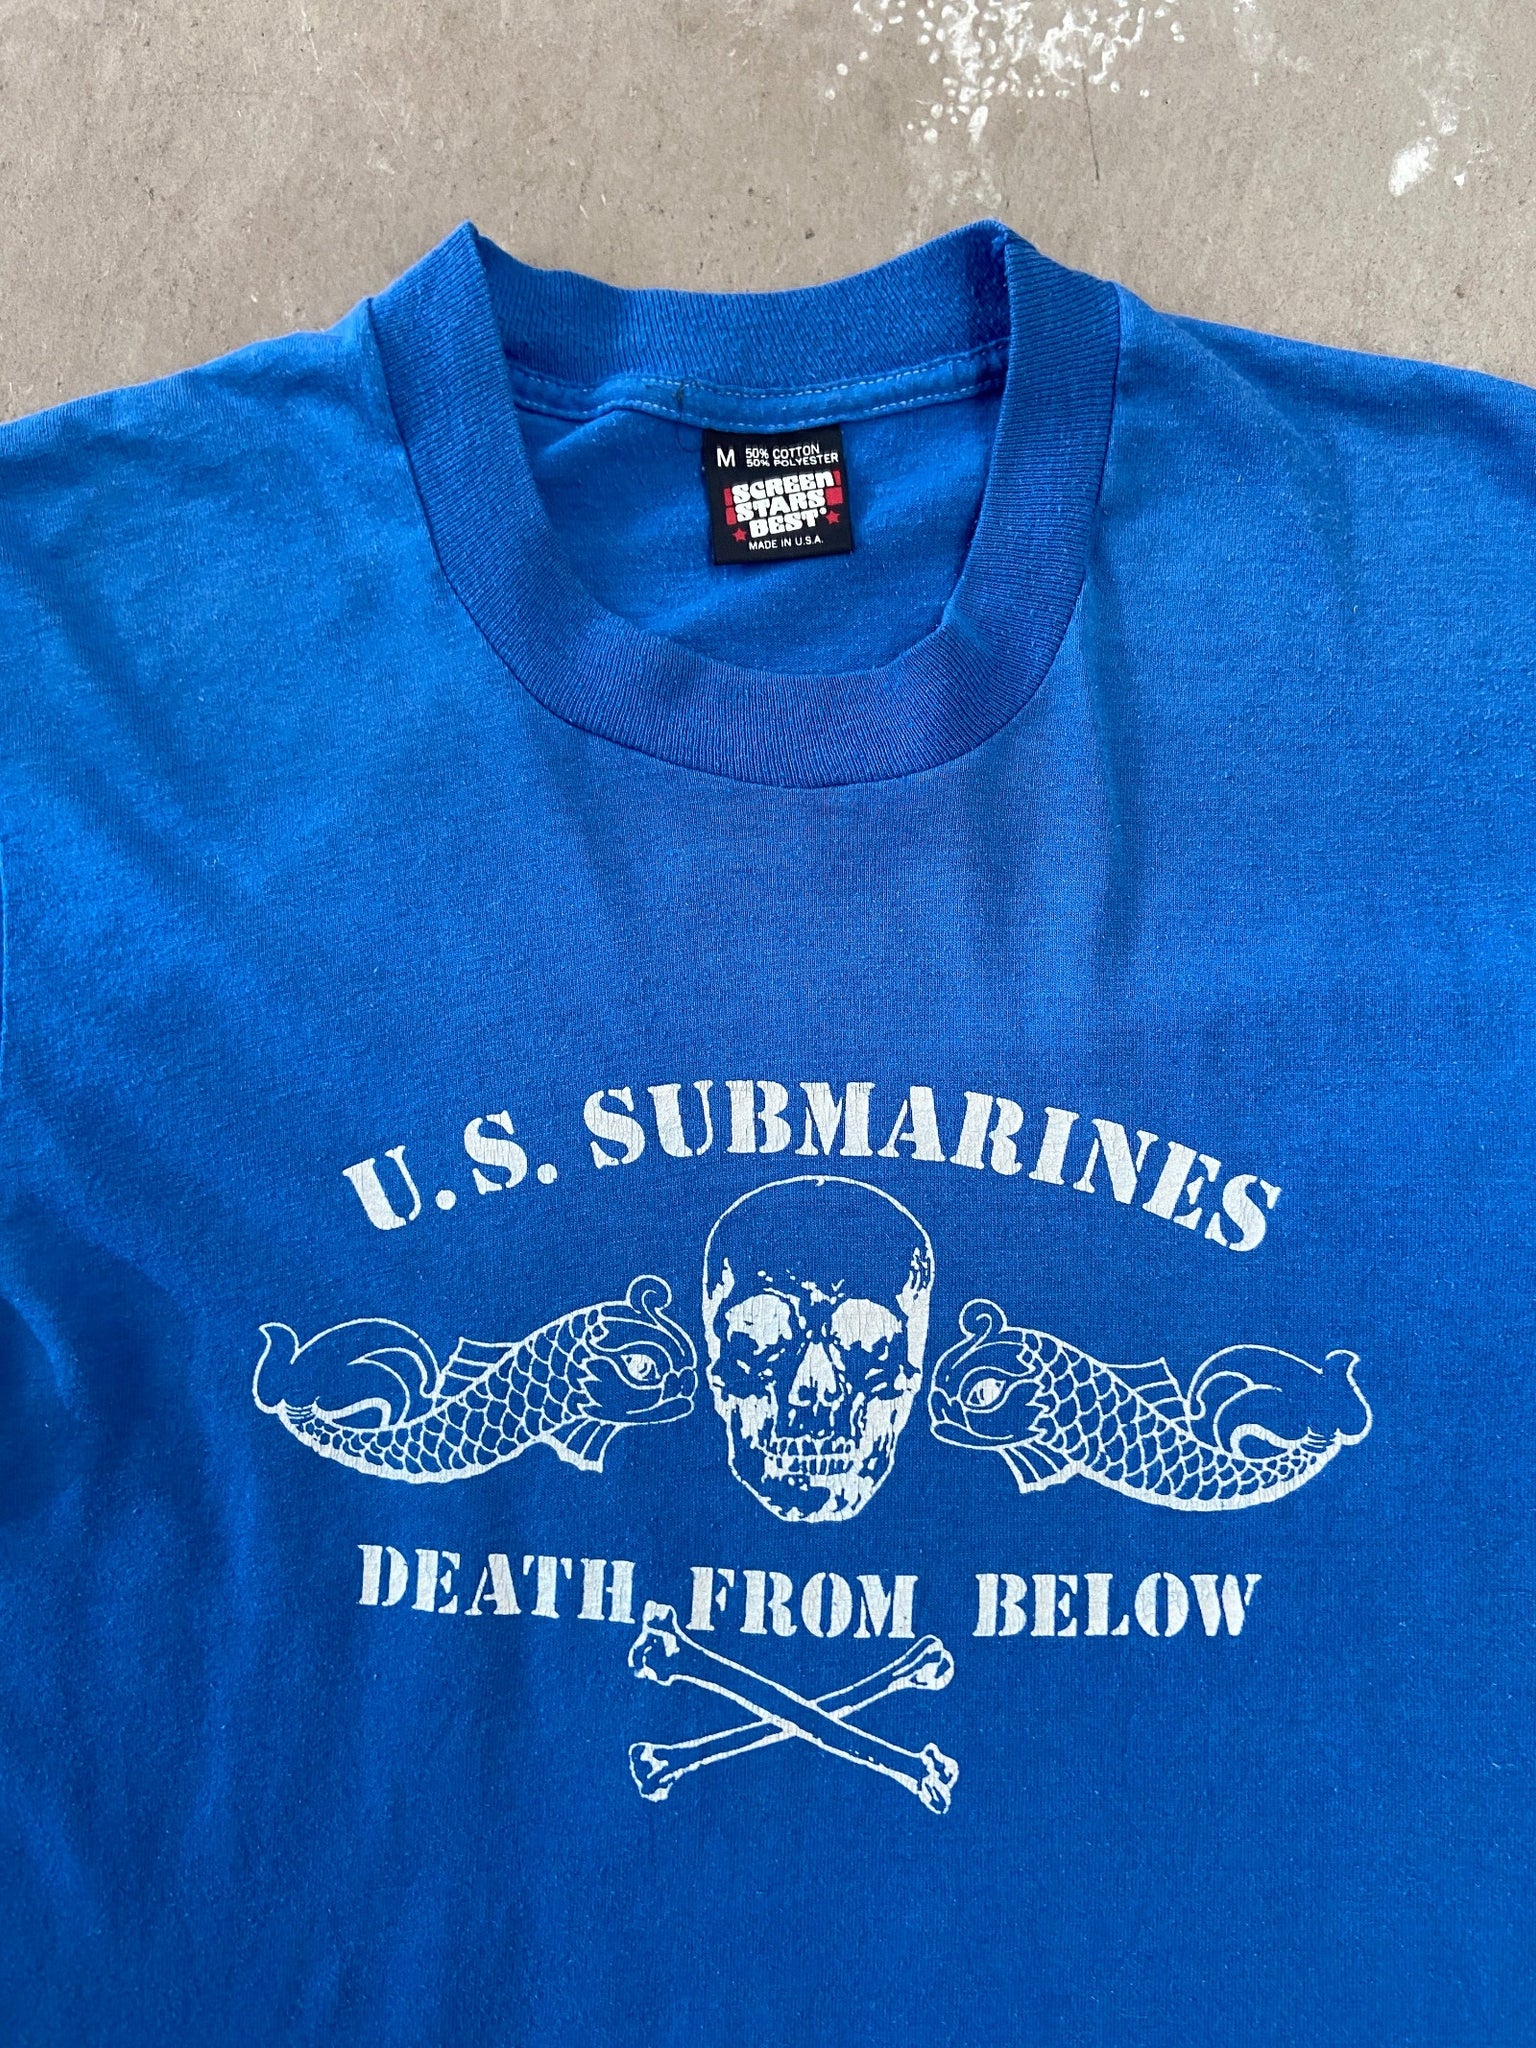 US Submarines Death From Below T-shirt - M